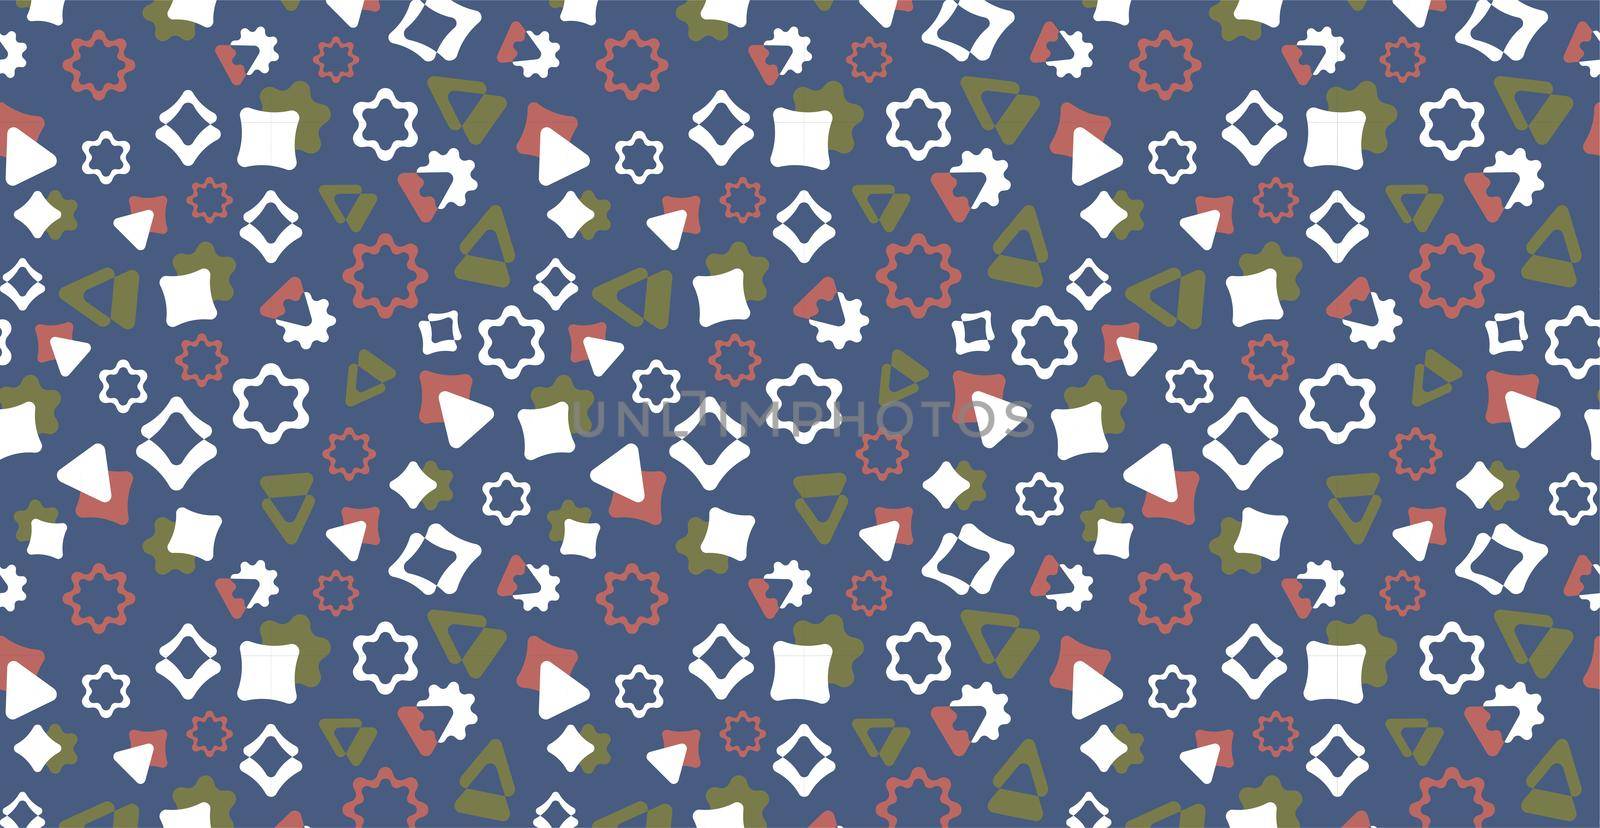 Cute colorful doodles. Bright geometric pattern. Festive children's background. Can be used for wallpaper, background, web background, fabric, wrapping paper, digital paper.